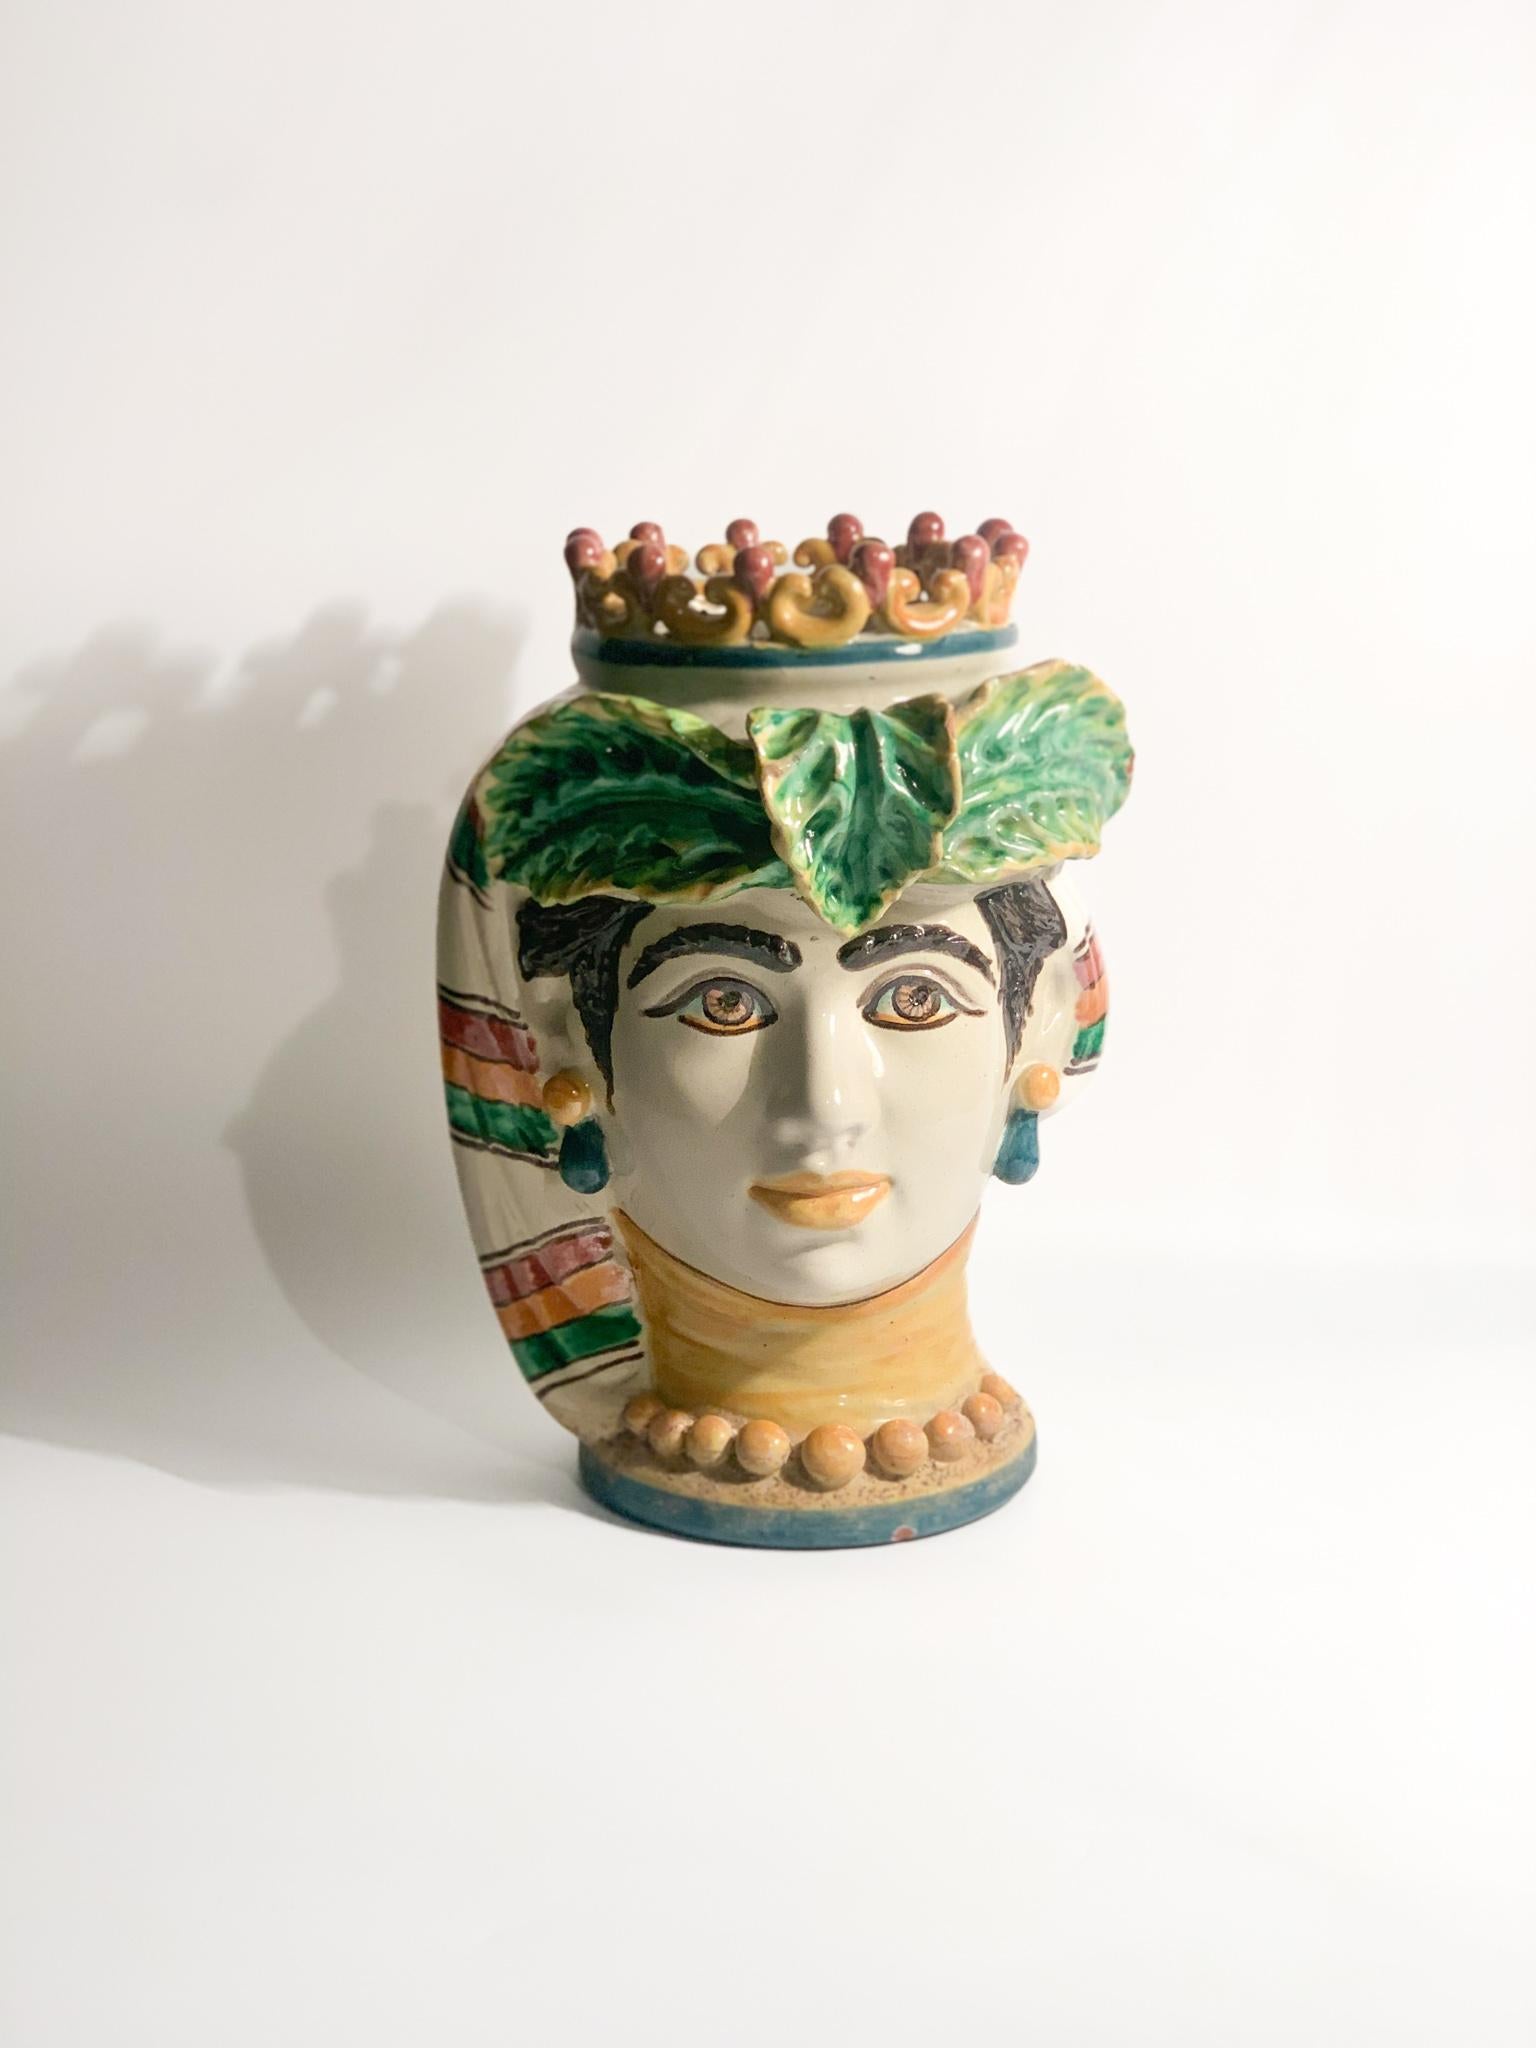 Moor's head in Caltagirone ceramic of a male figure, created by Giacomo Alessi in the 1990s

Ø cm 20 h cm 29

Giacomo Alessi is an Italian master ceramist born in Caltagirone, Sicily, in 1957. He is one of the few registered Sicilian masters in the